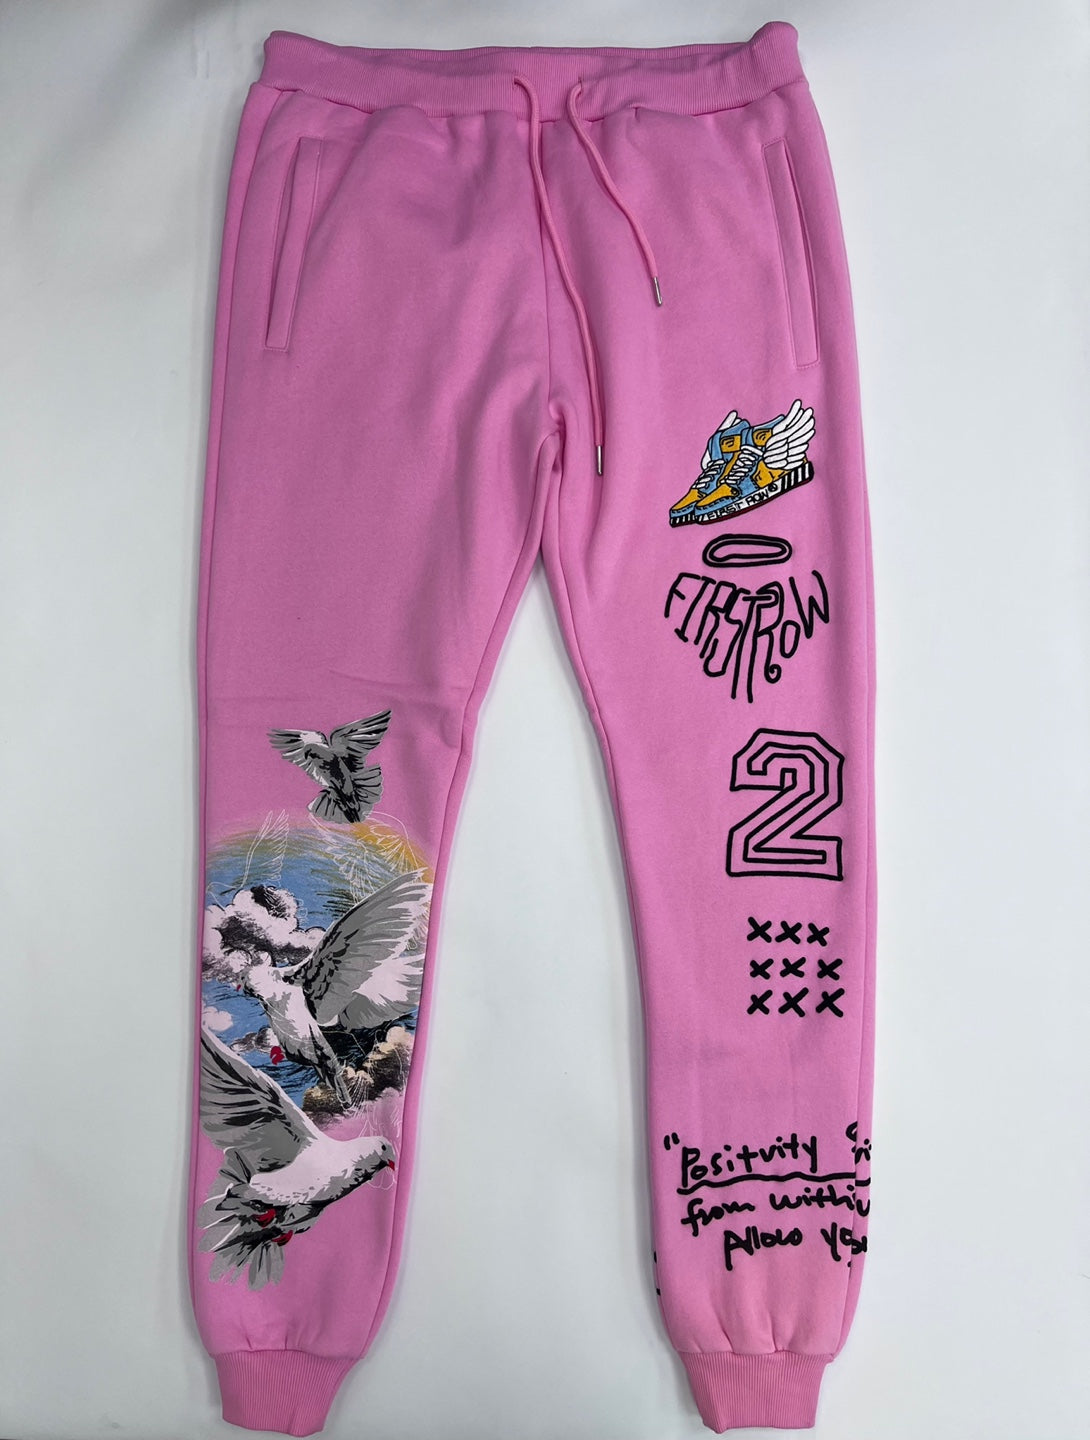 FIRST ROW Flying Sneaker Sweatpants Joggers